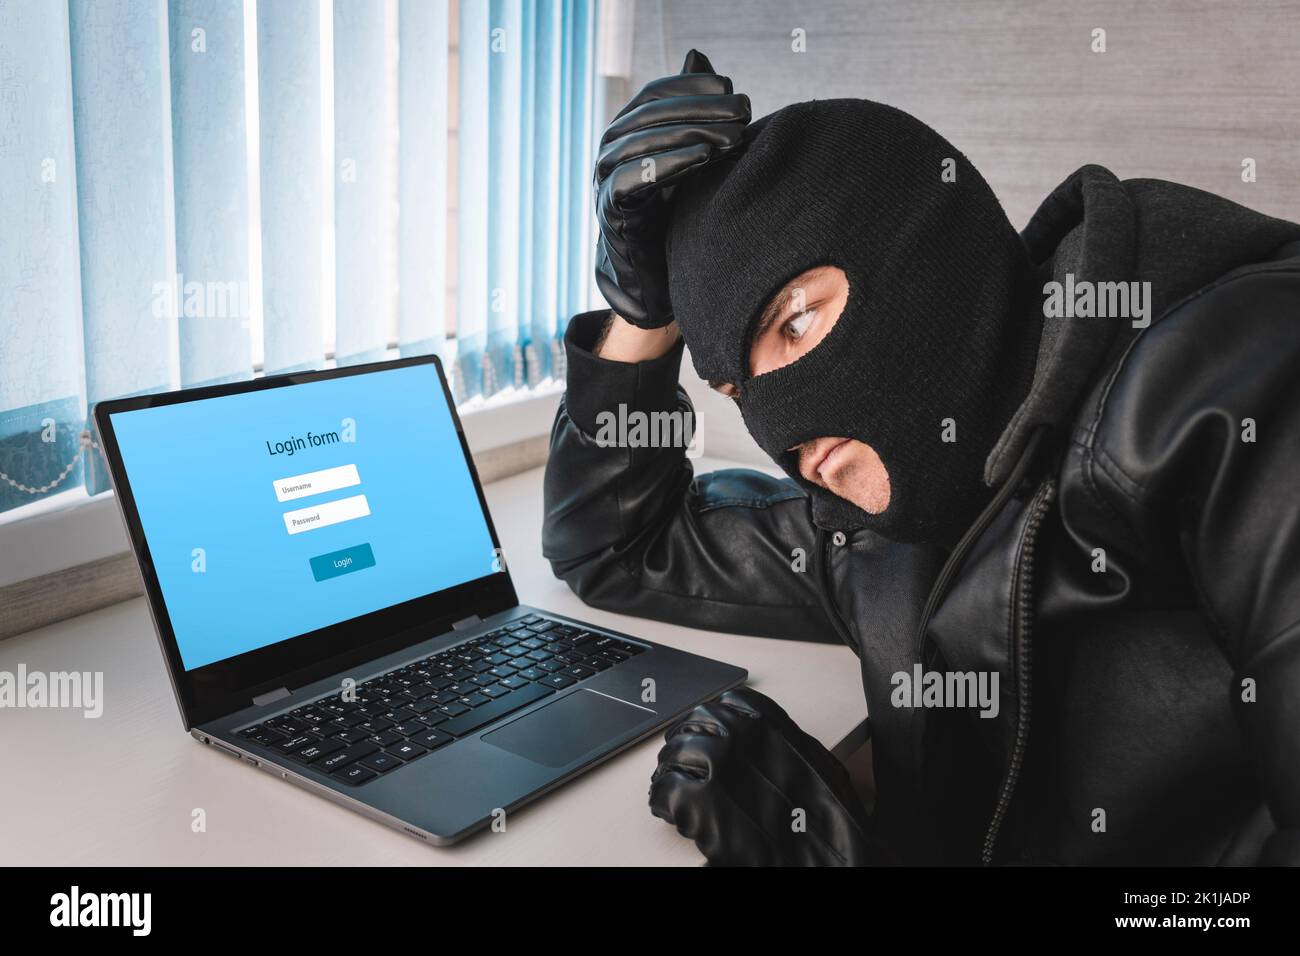 Hacker With Log On Screen, Computer Fraud Concept Background. A thief in a balaclava mask is thinking about a password to log in. The concept of ident Stock Photo